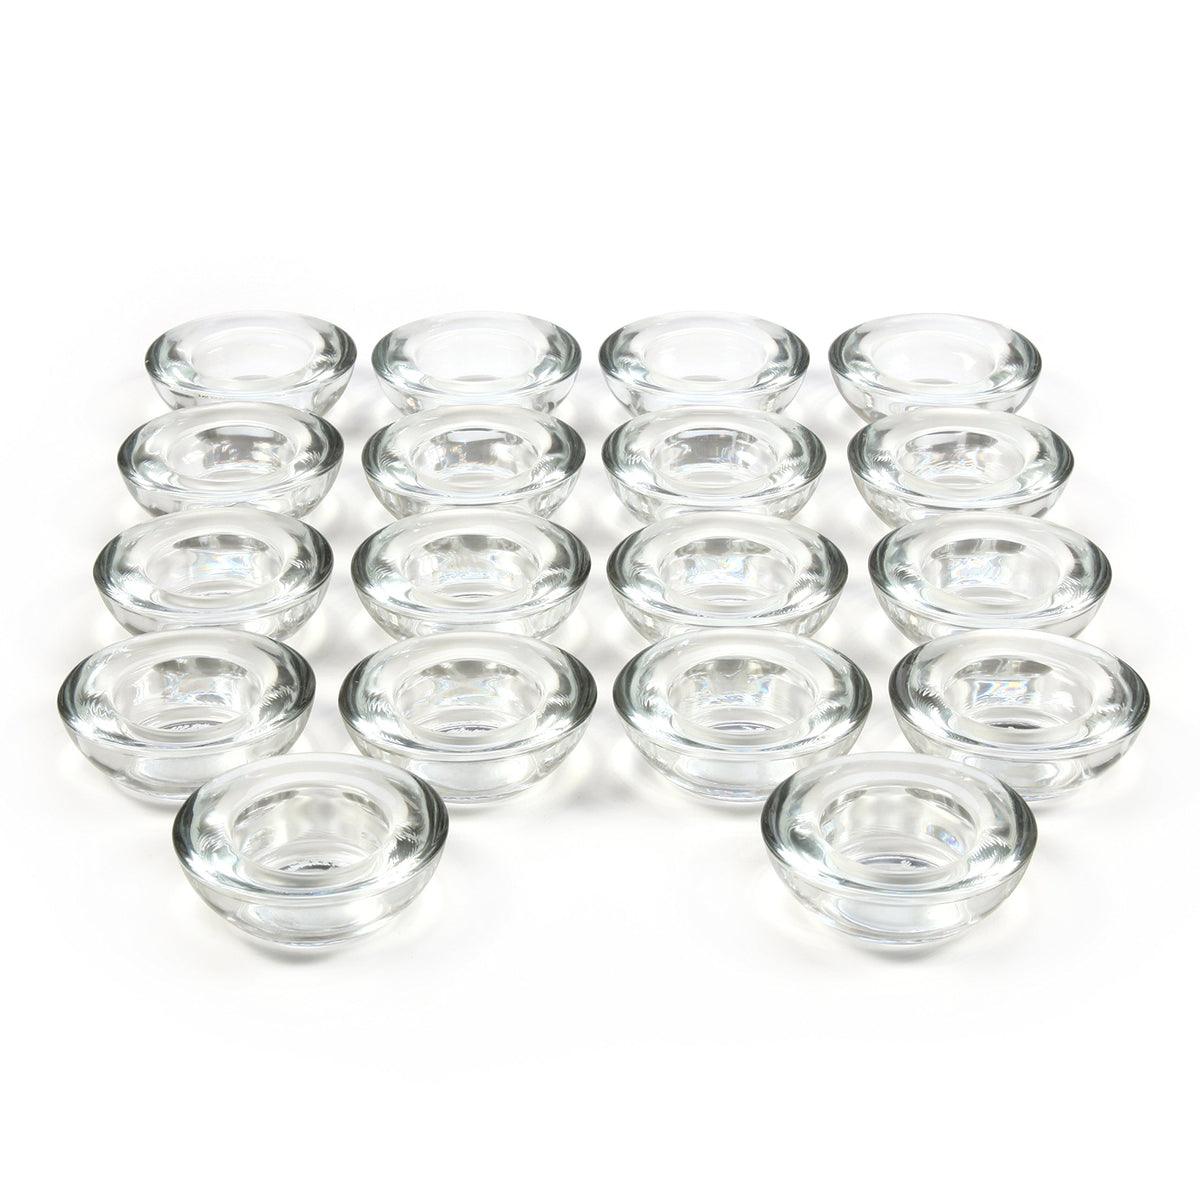 HOSLEY®  Glass Clear Tealight Holders, Set of 18, 3 inches Diameter each